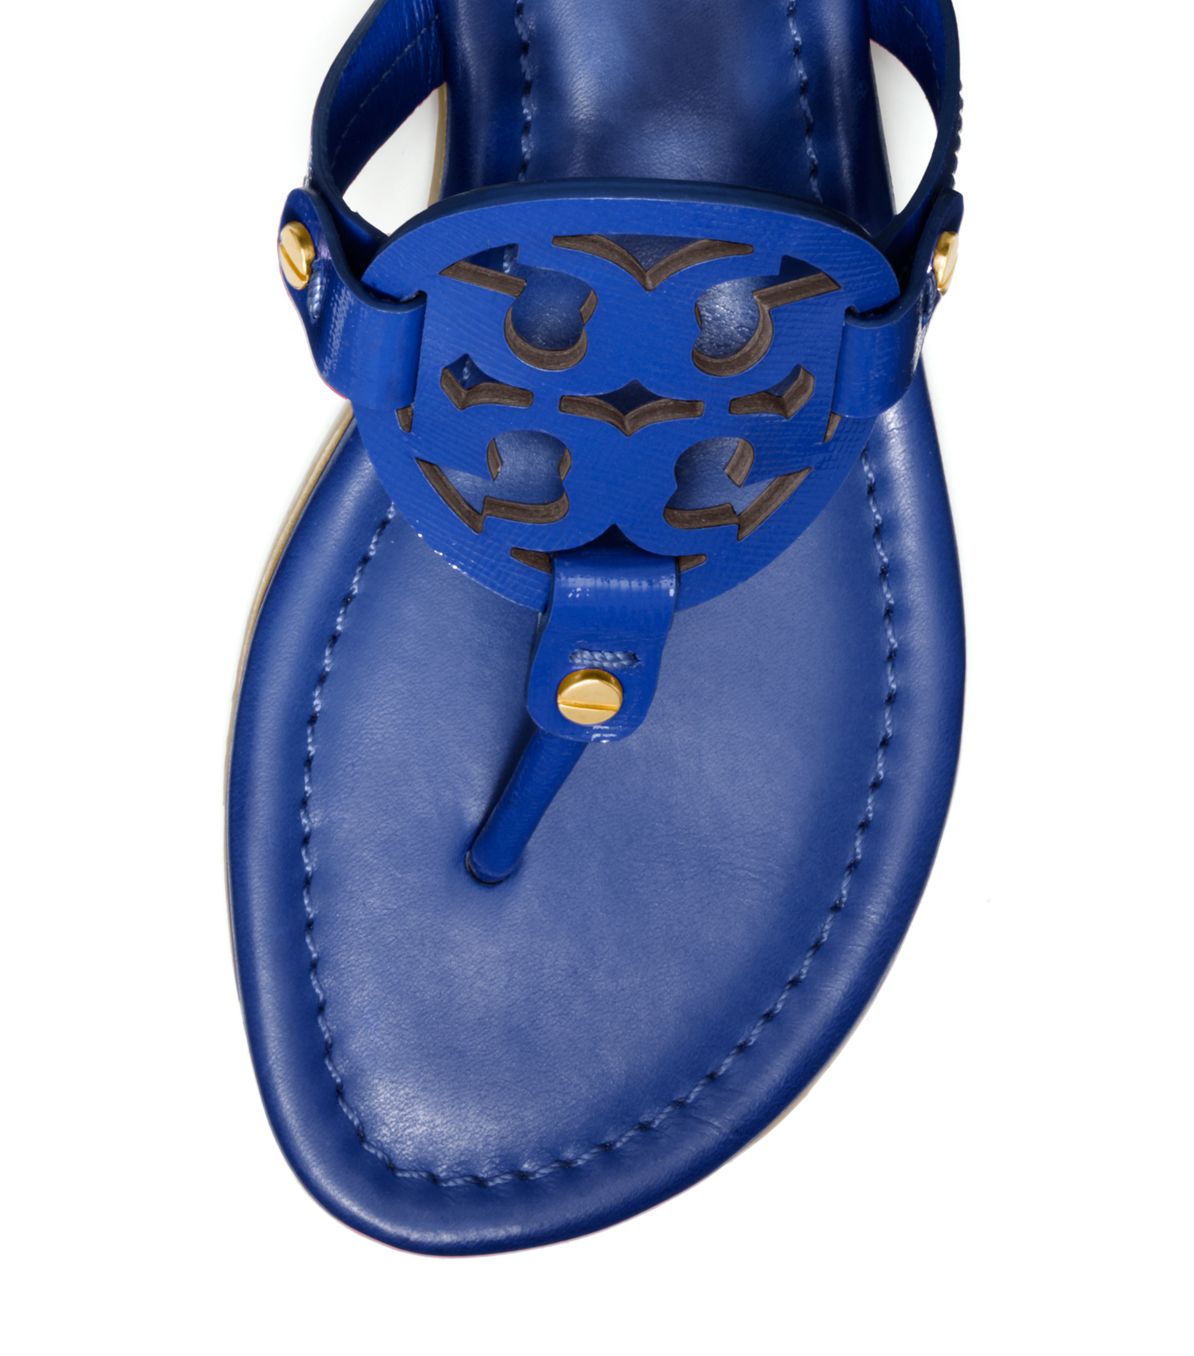 Lyst - Tory burch Patent Leather Miller Sandal in Blue